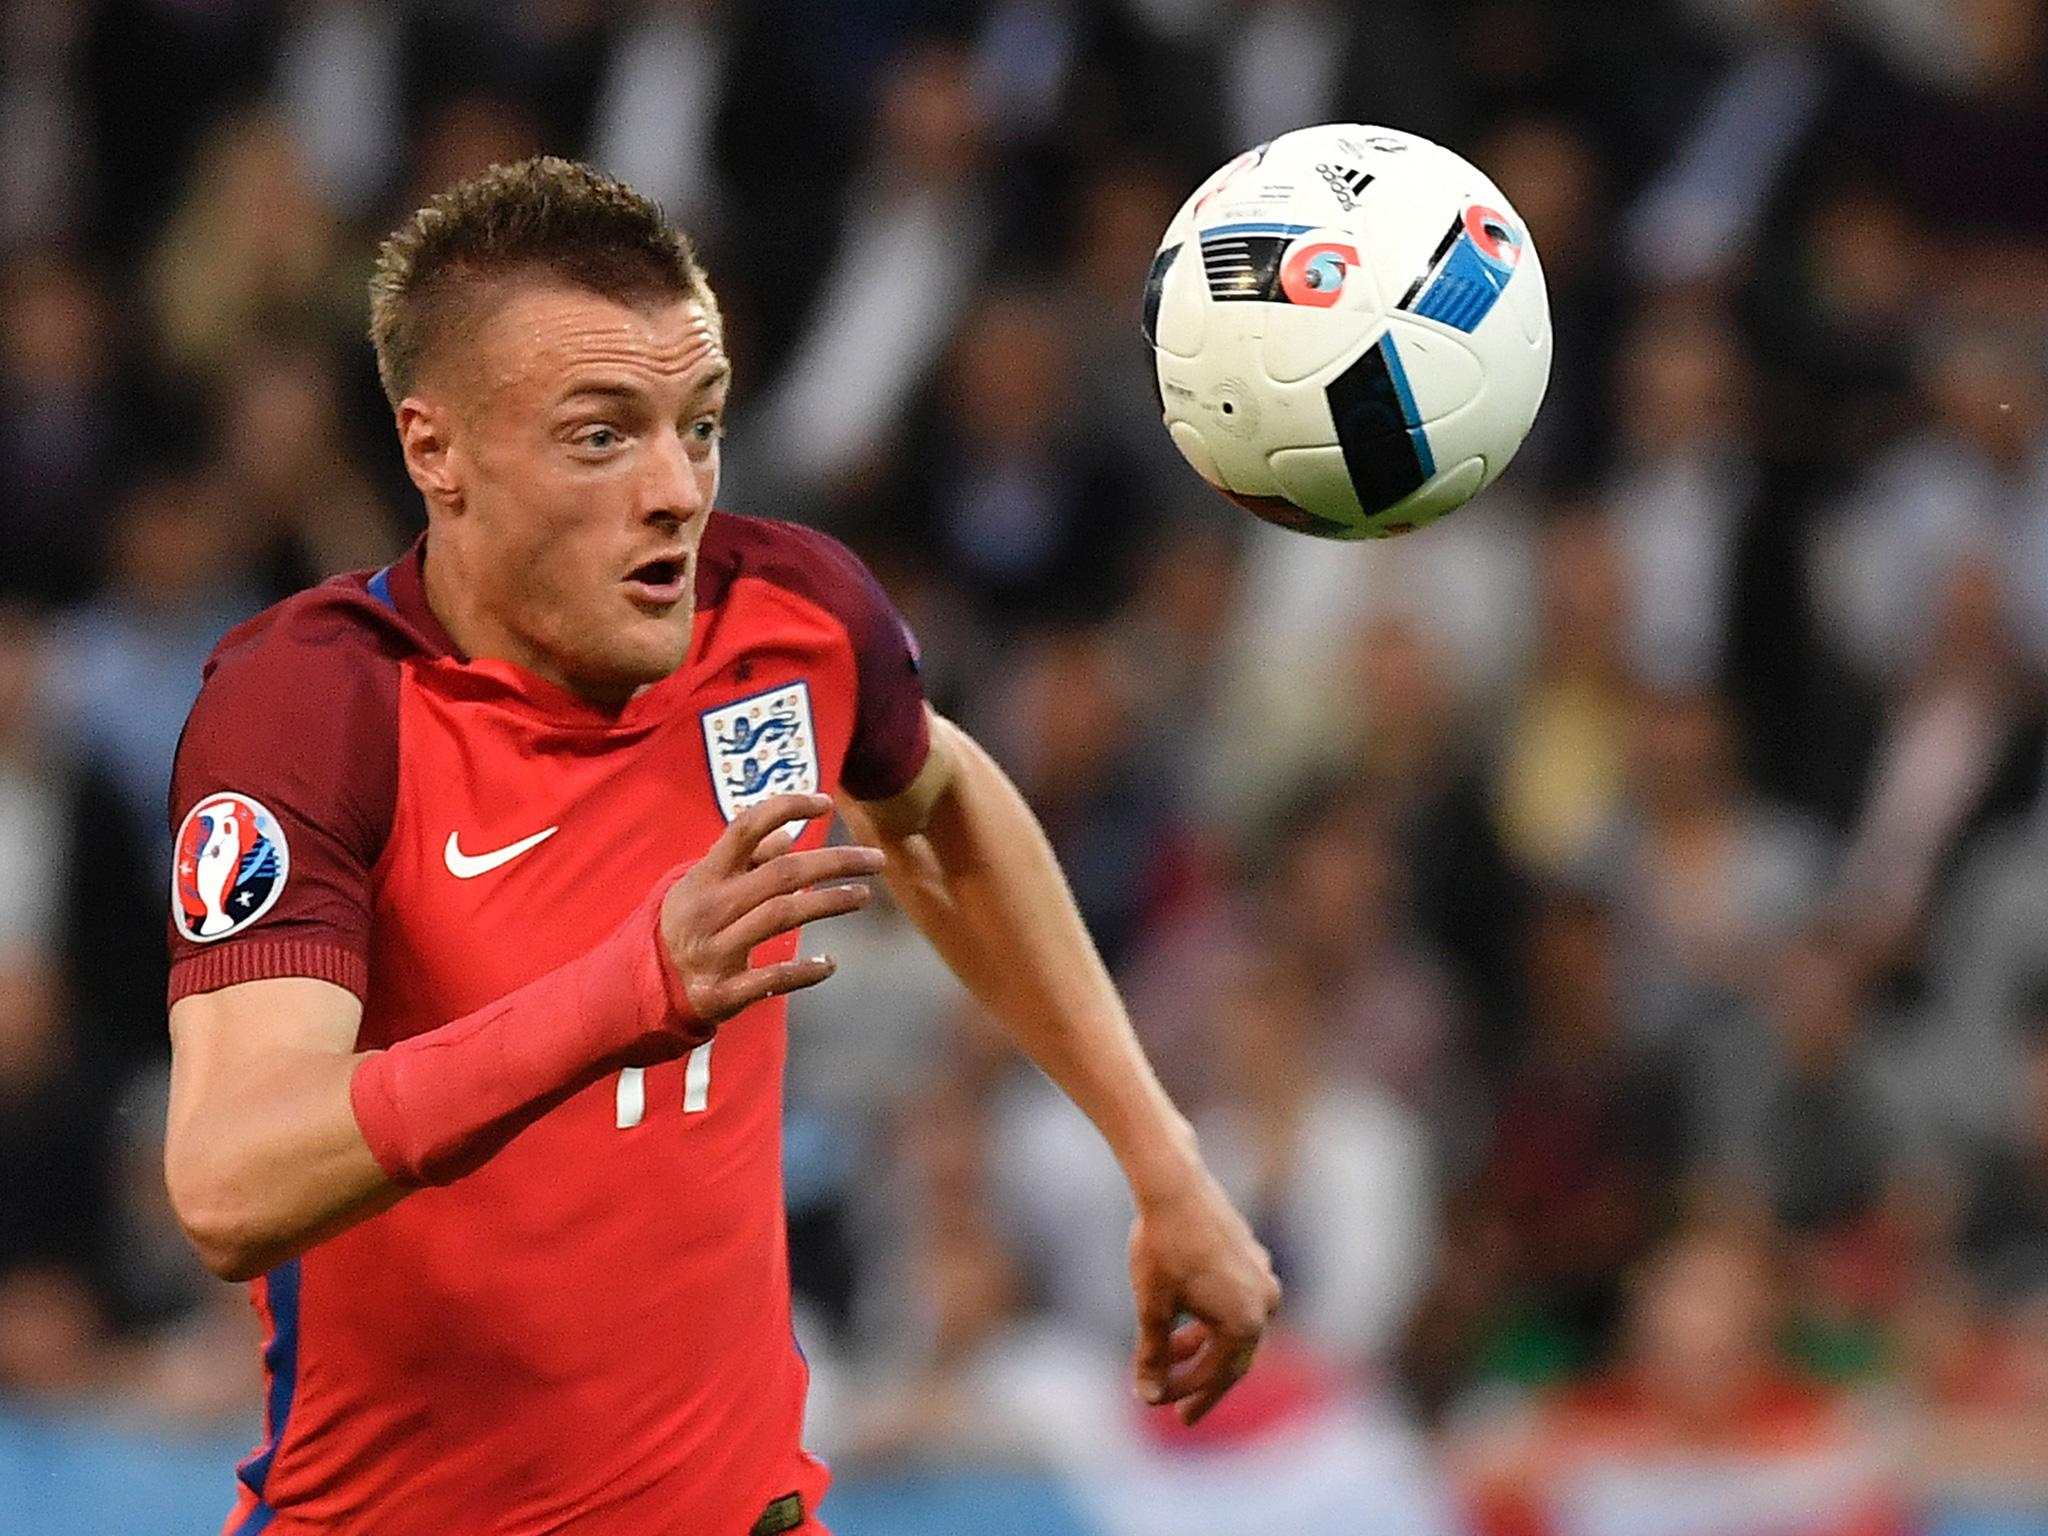 Jamie Vardy toiled to little overall effect for England on a frustrating night for the Three Lions